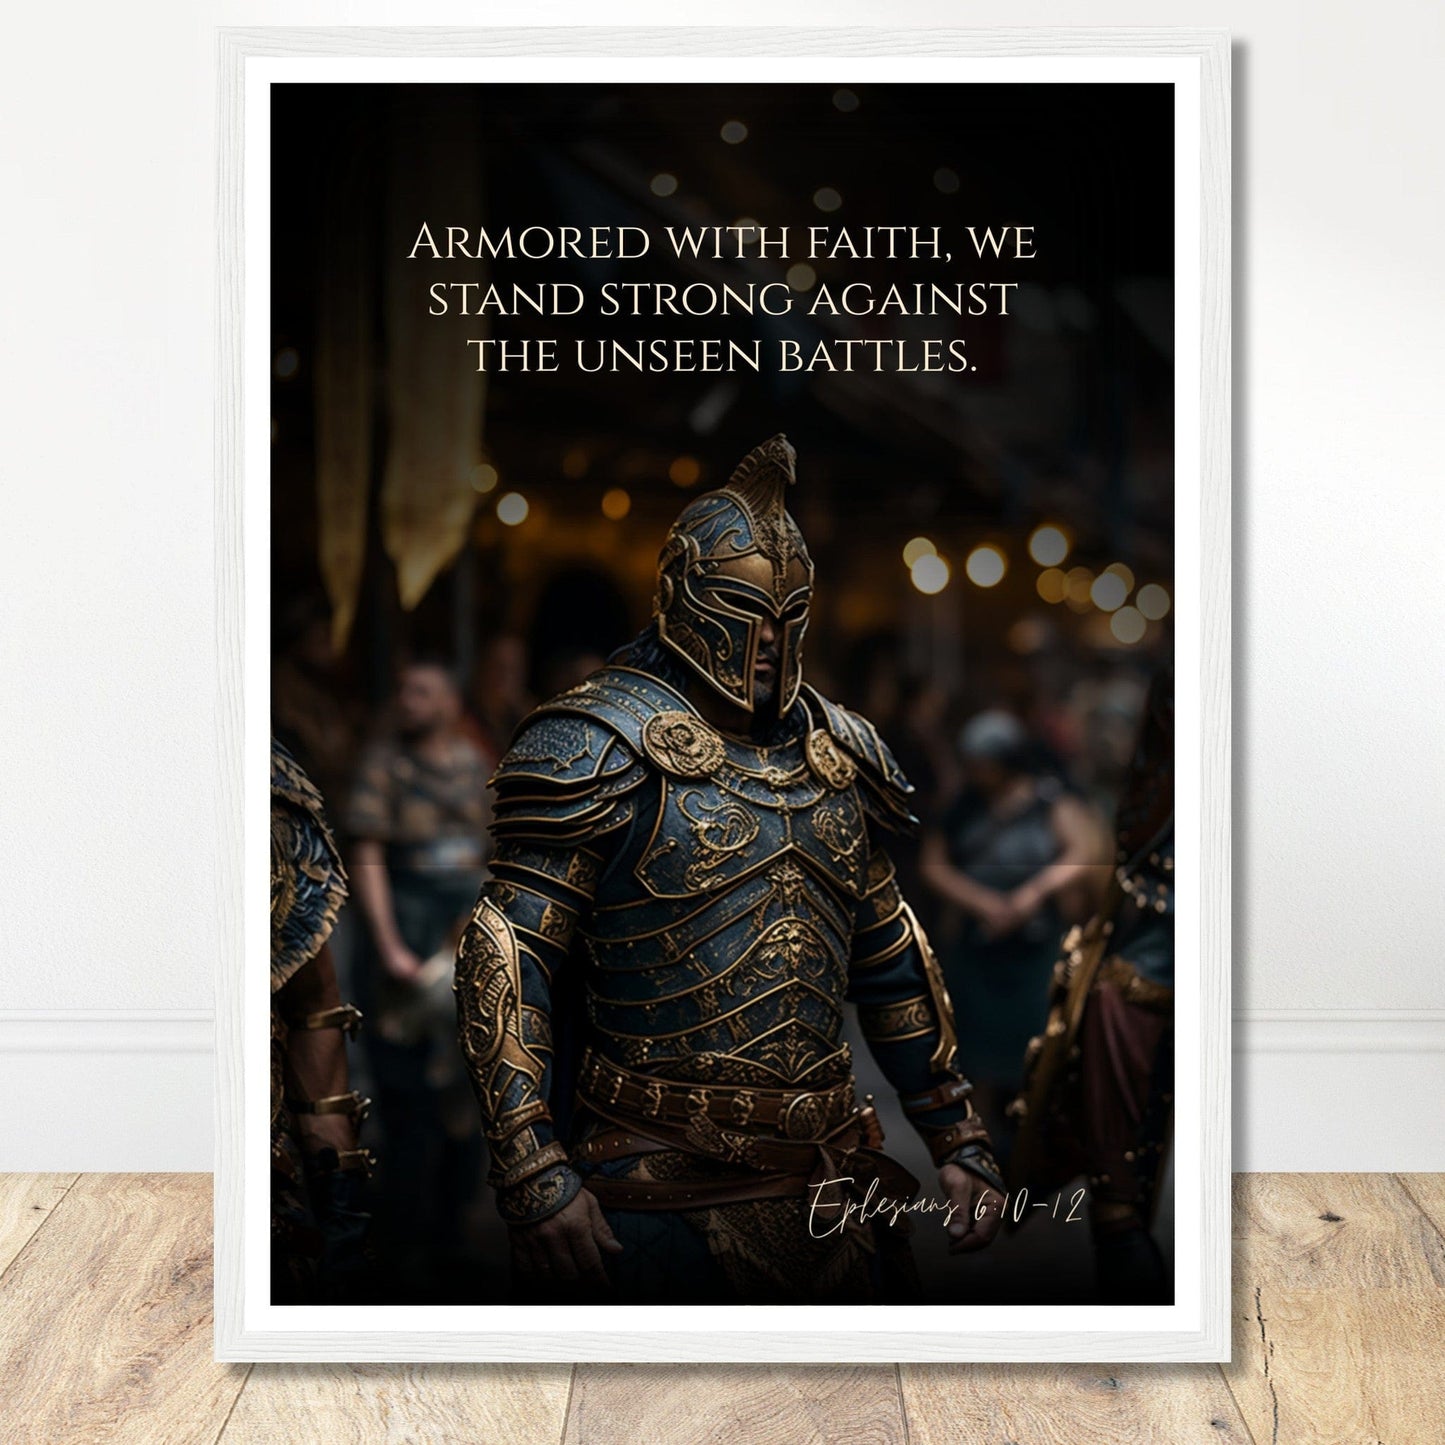 Coffee With My Father Print Material 45x60 cm / 18x24″ / Premium Matte Paper Wooden Framed Poster / White frame The Unseen Battles: Ephesians 6:10-12 - Artwork